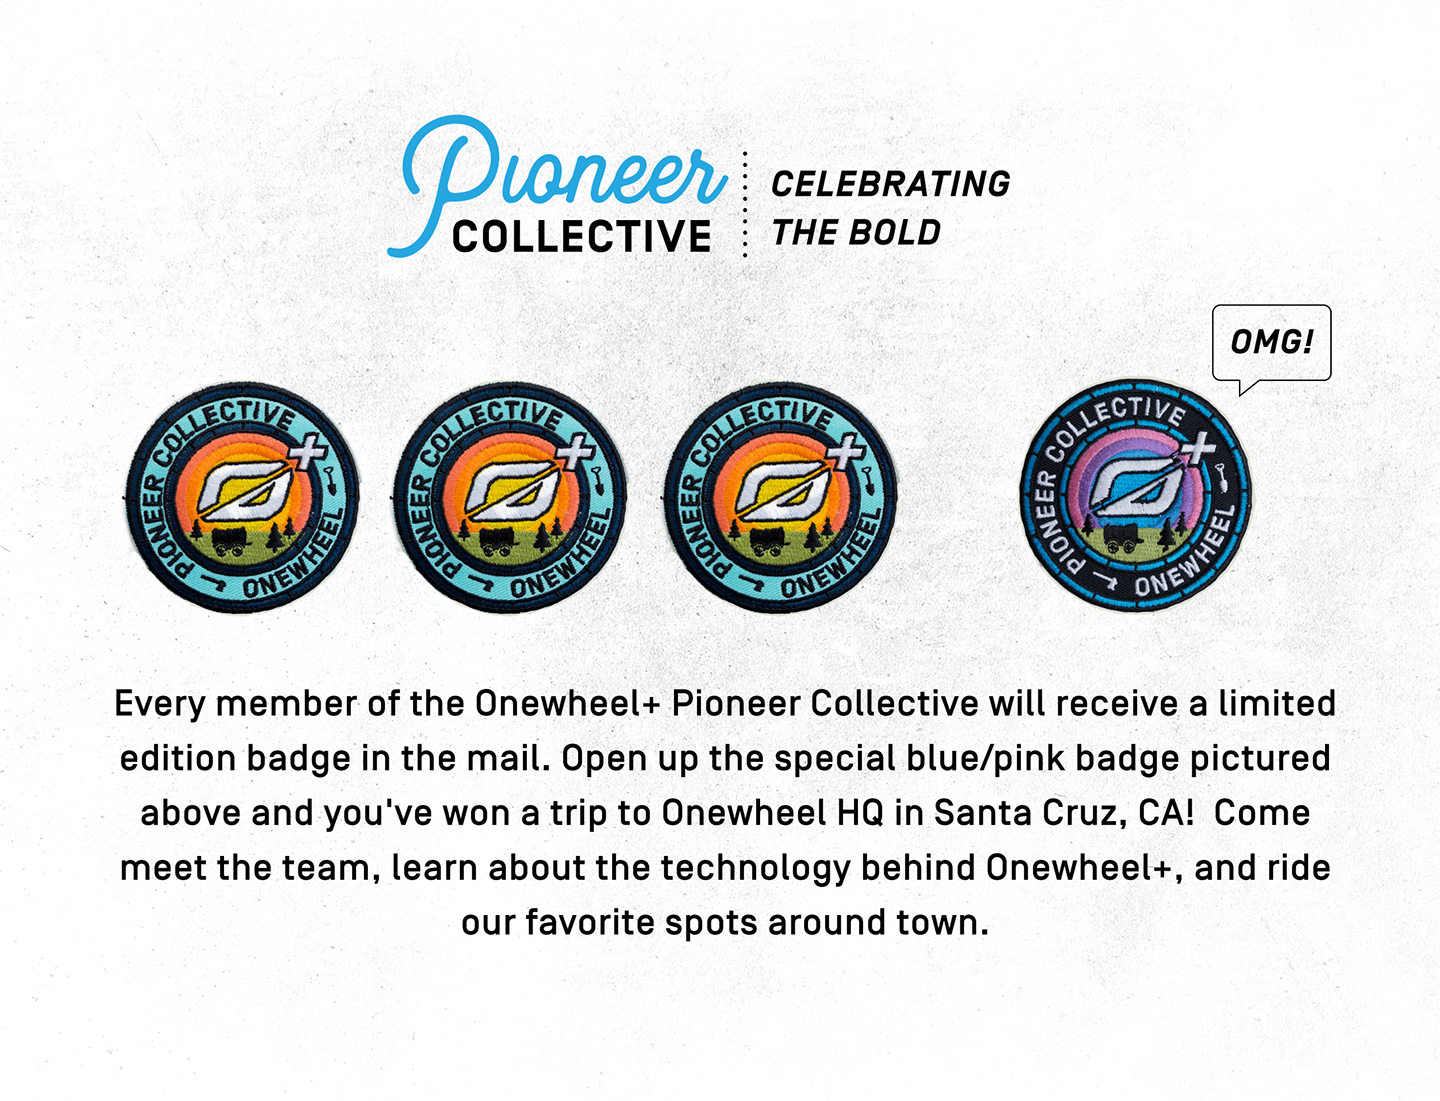 Pioneers Collective